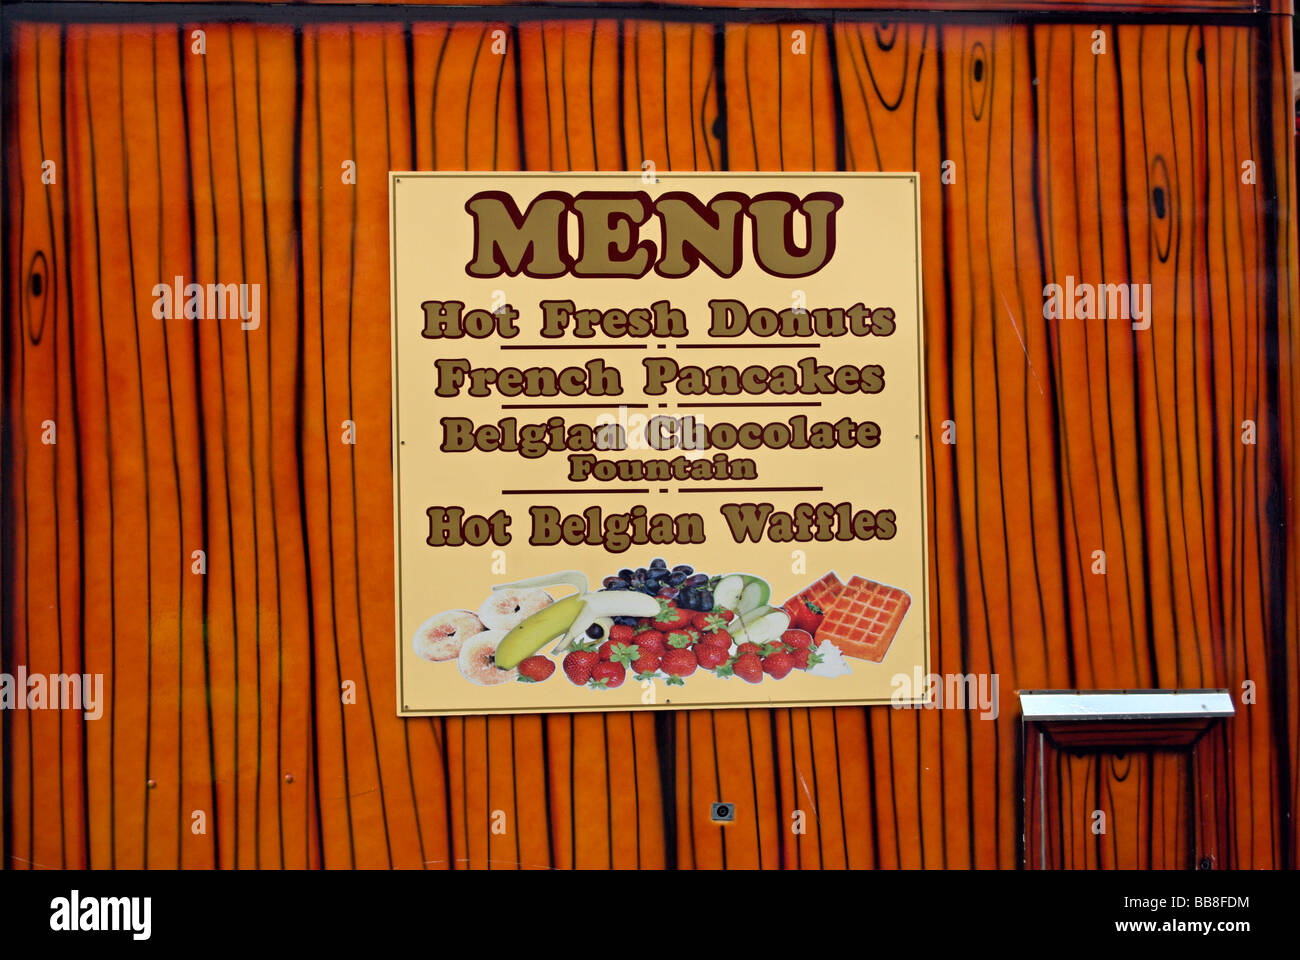 menu on british food vendors van offering donuts, belgian waffles and french pancakes Stock Photo